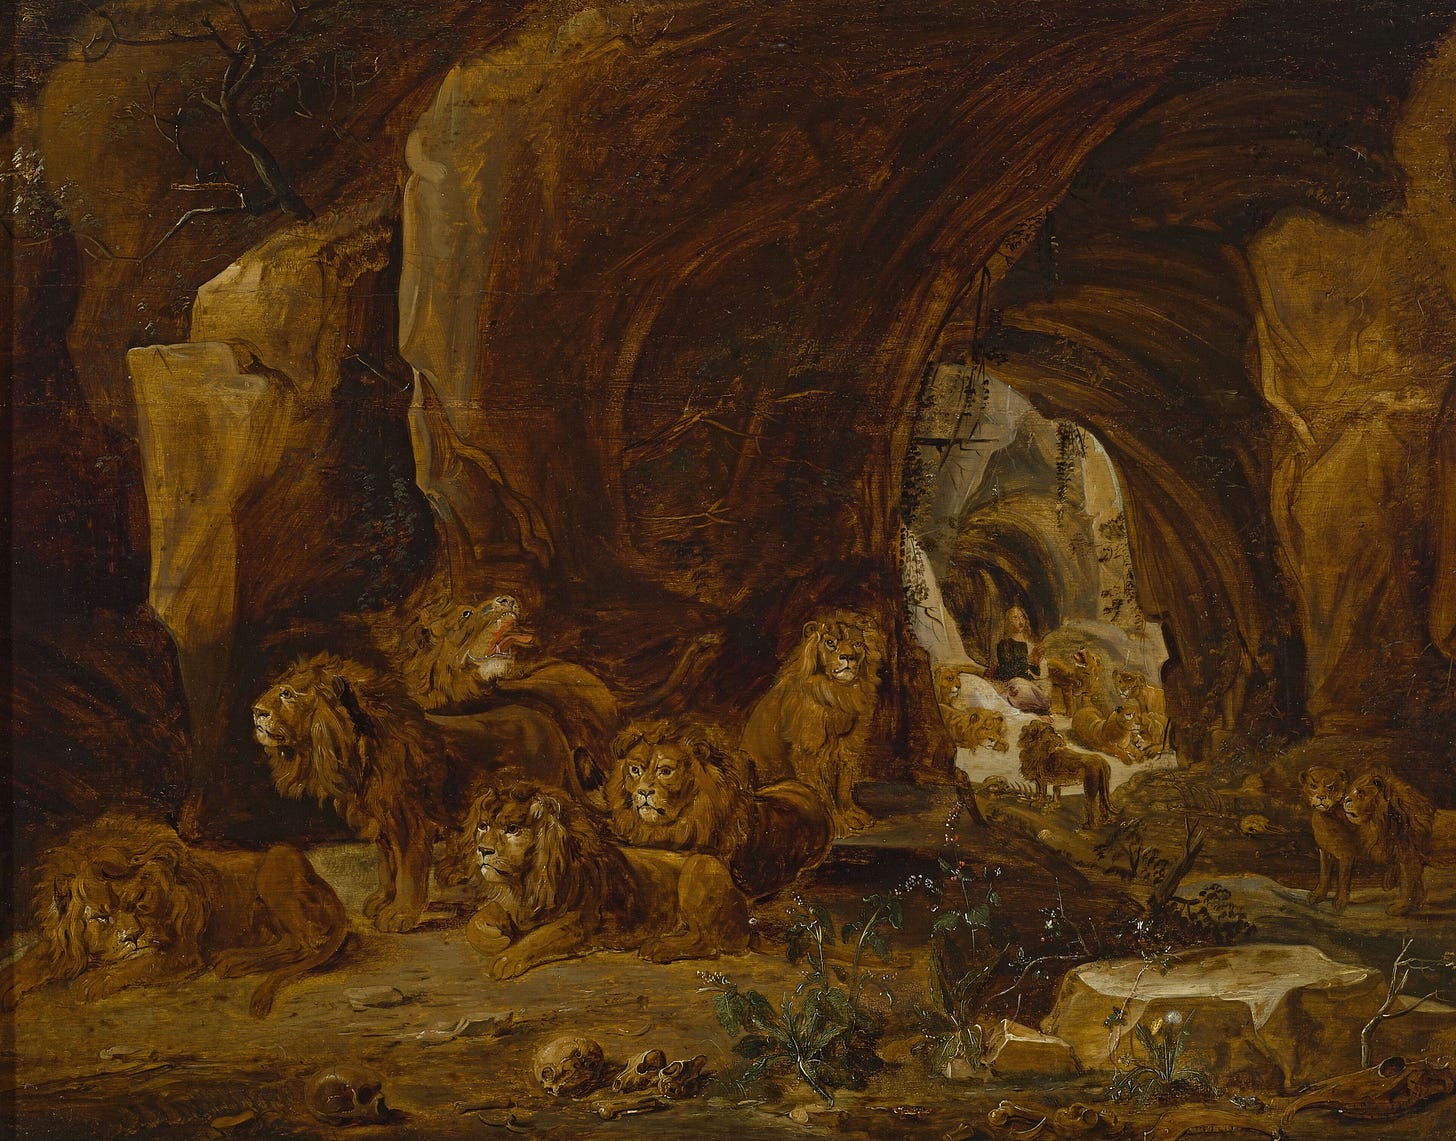 Daniel in the lions’ den (Daniel 6-17-22, 14-30-39) (1650s) by David Teniers The Younger (Flemish, 1610 - 1690)